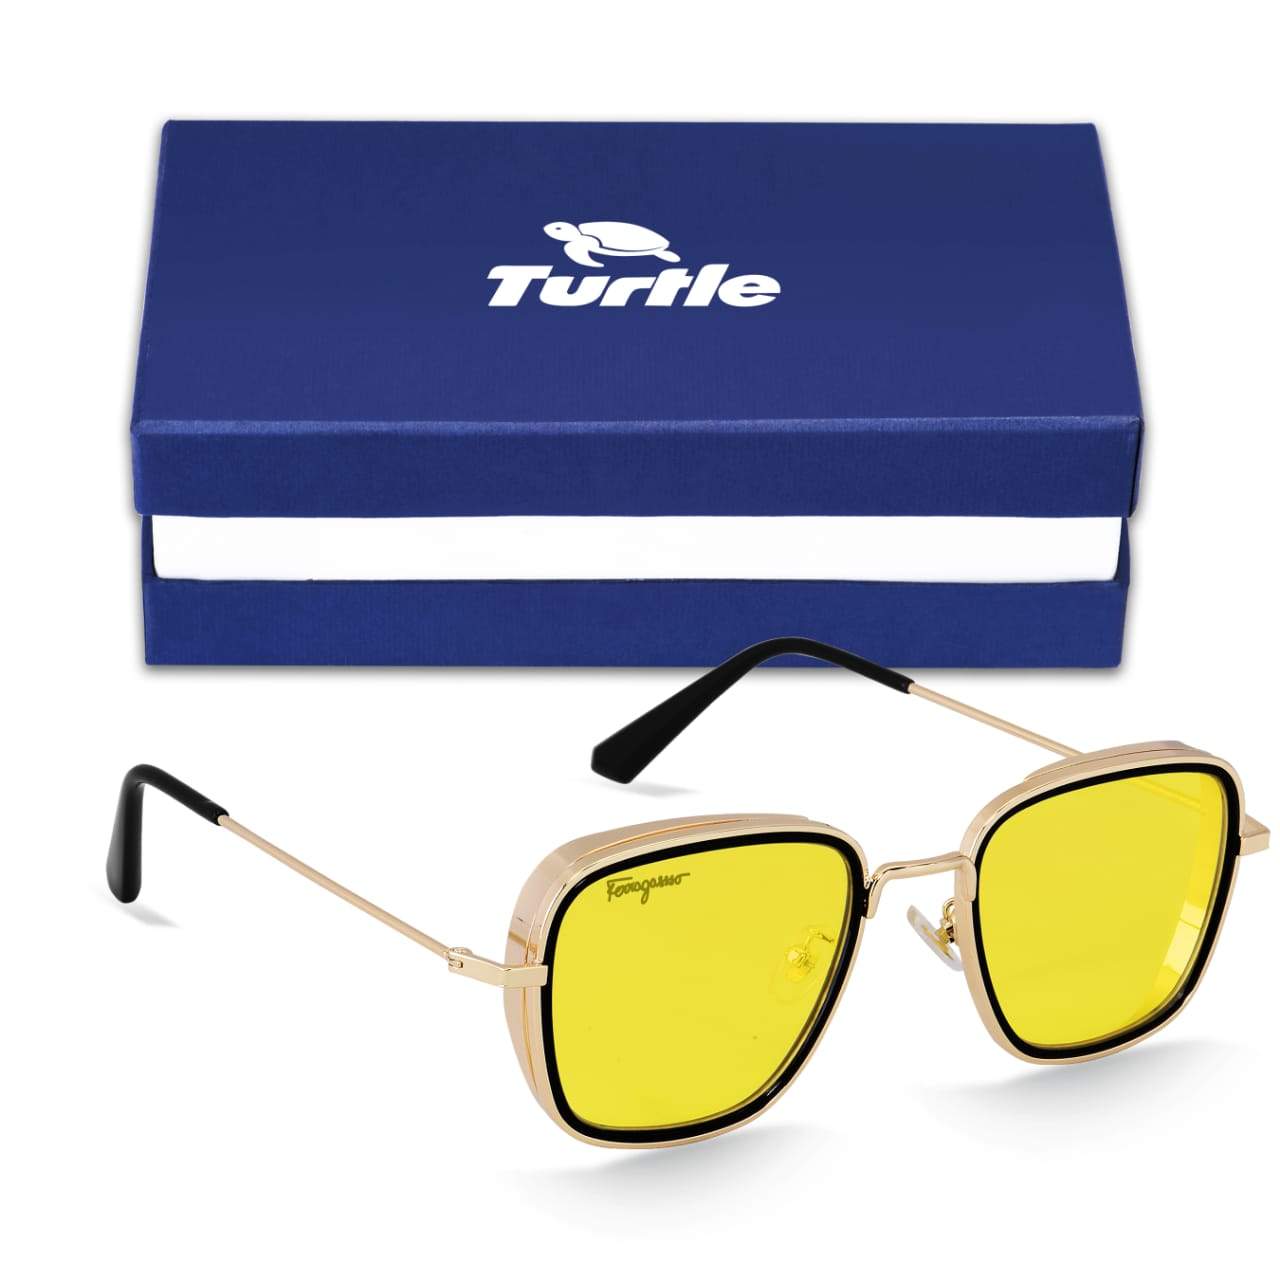 Stylish Square Yellow Candy Sunglasses For Men And Women-Unique and Classy